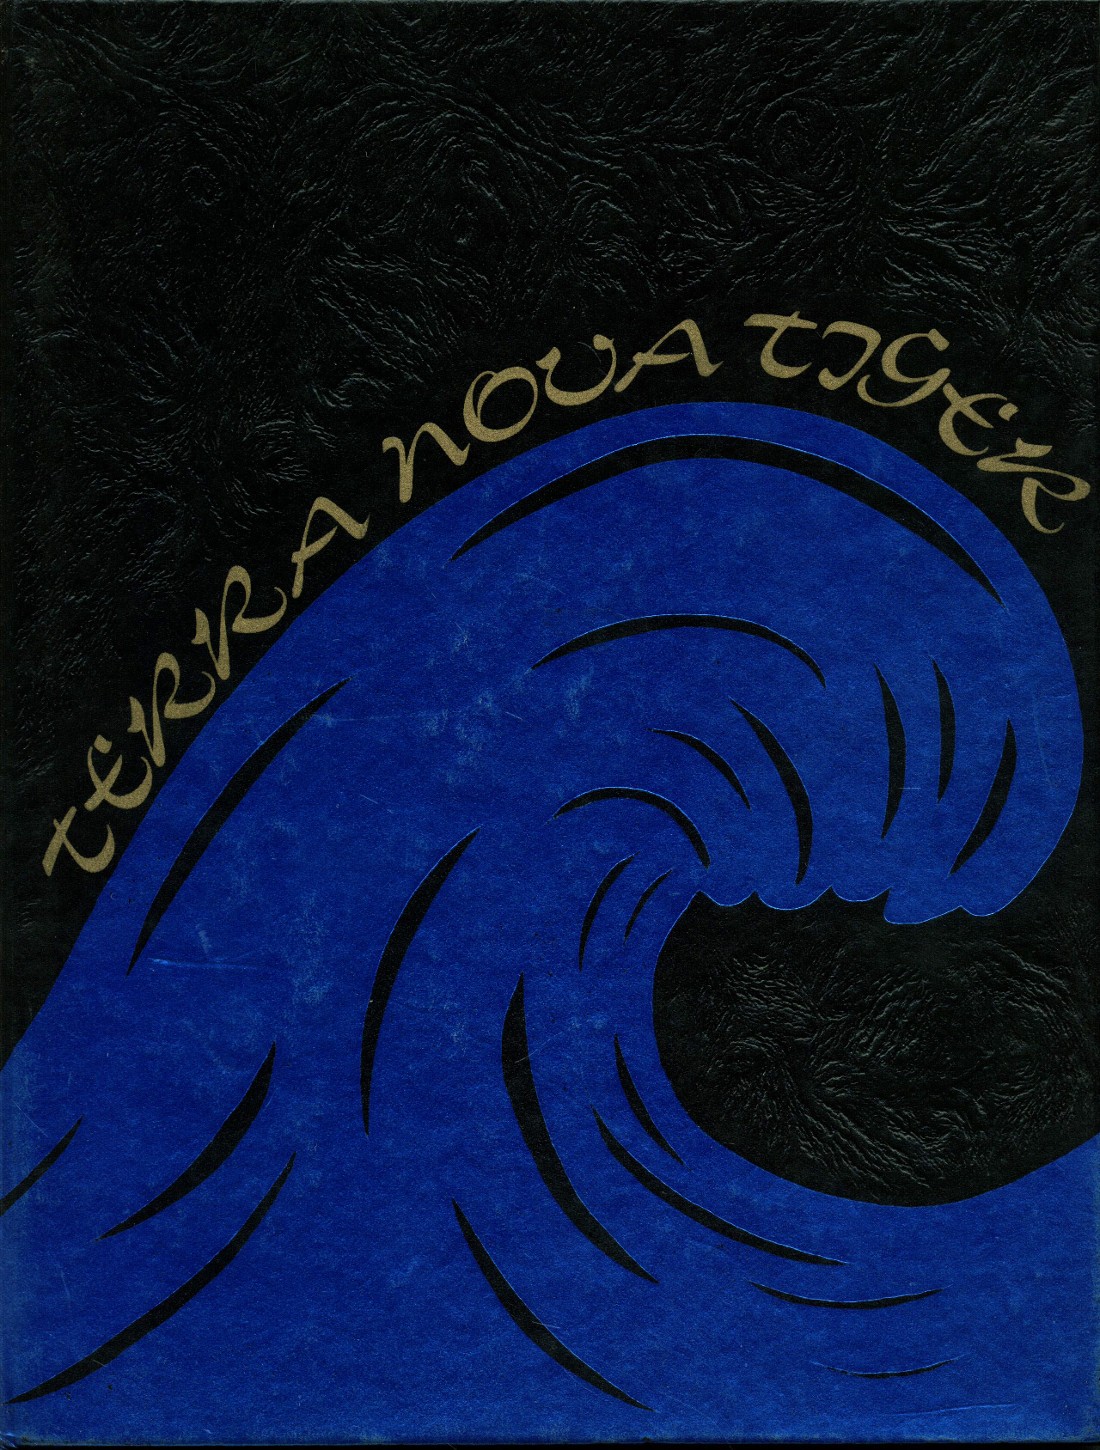 1987-yearbook-from-terra-nova-high-school-from-pacifica-california-for